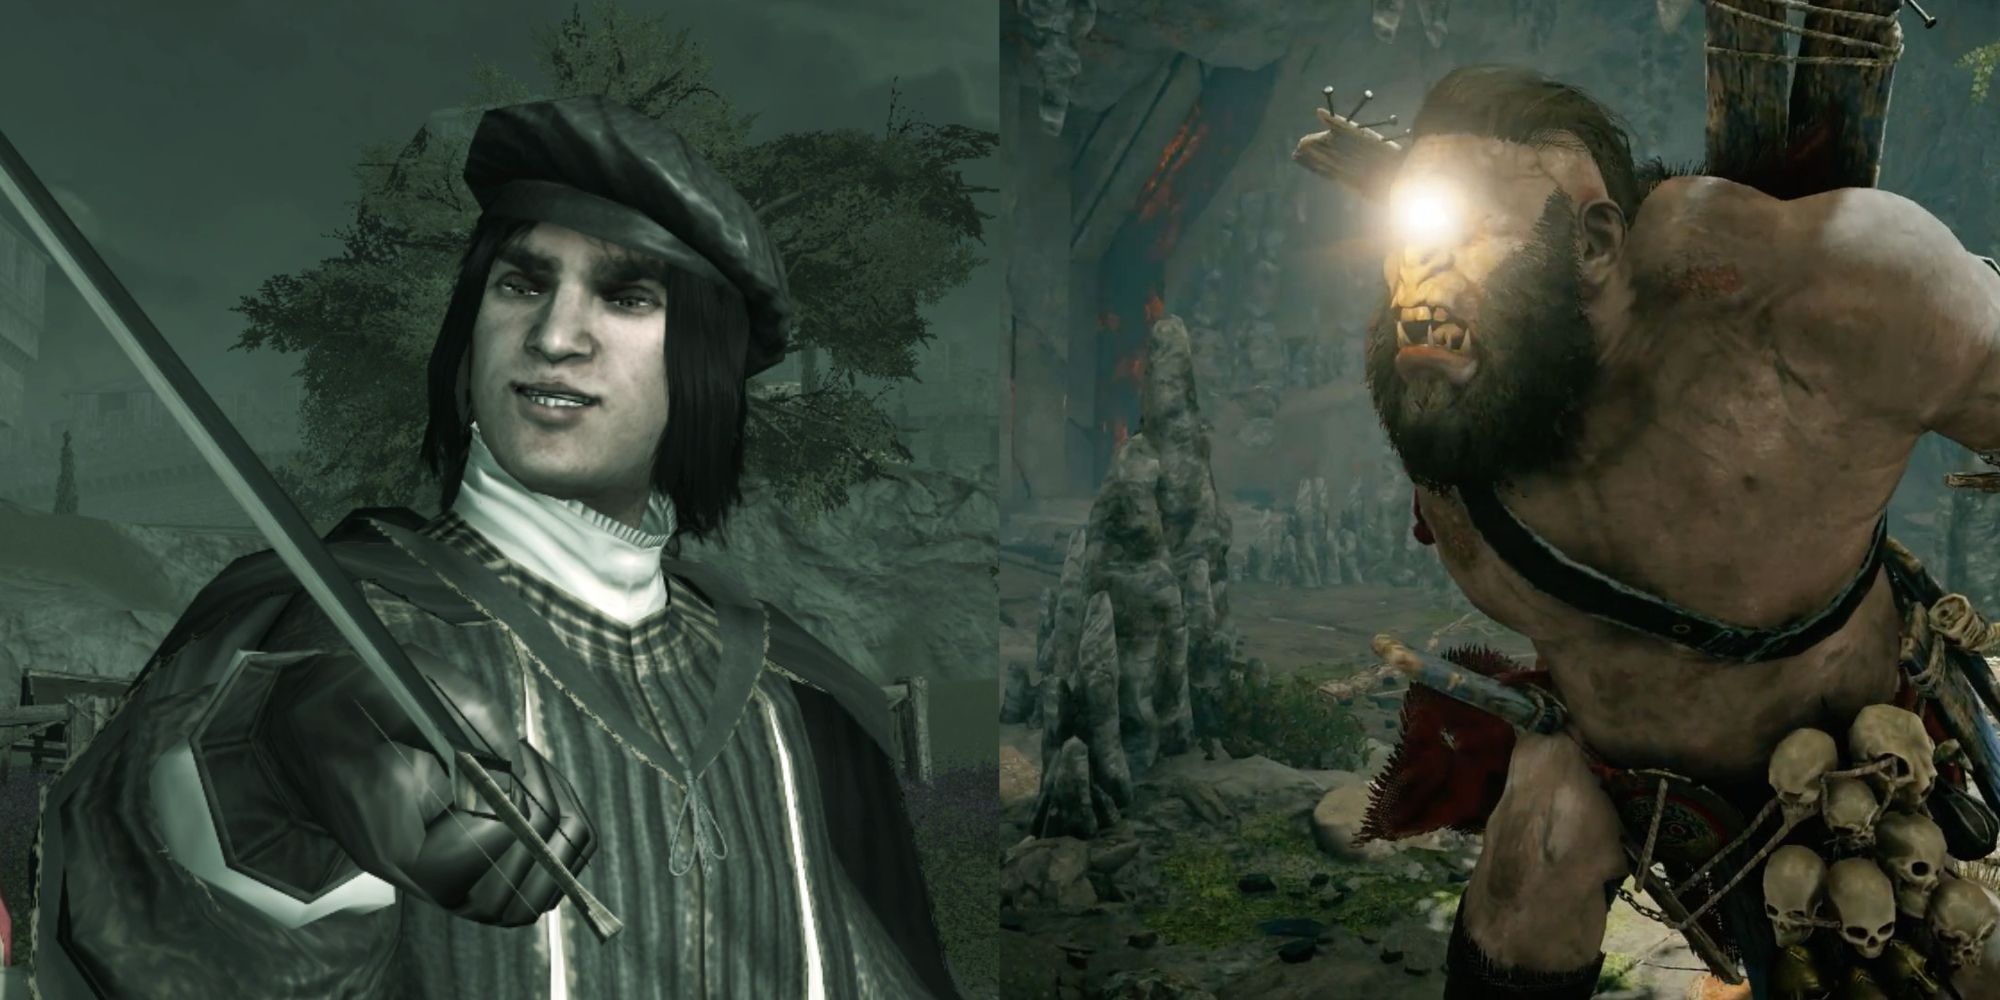 Split images of Vieri De Pazzi holding a sword in Assassin's Creed II and Cyclops flashing his eye in Assassin's Creed Odyssey